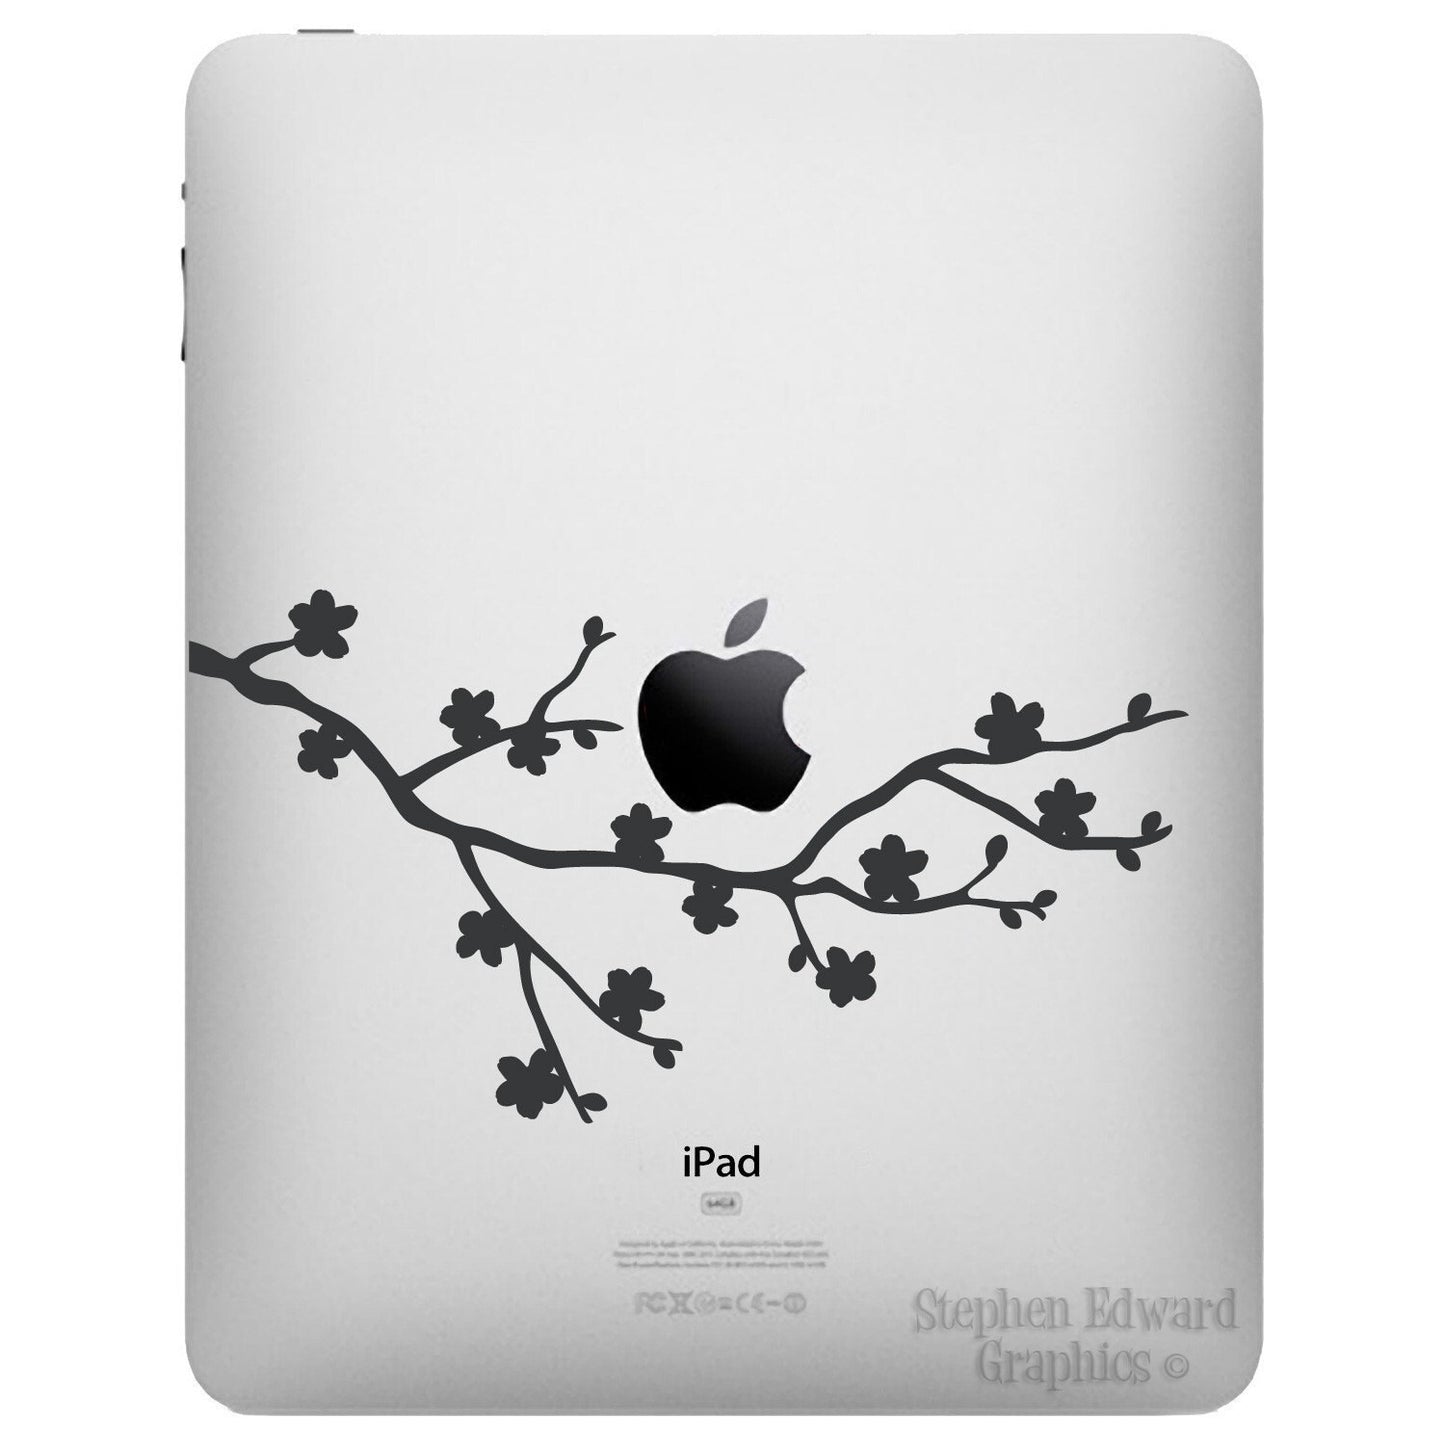 Cherry Blossom iPad Decal - Apple iPad Flower stickers by Stephen Edward Graphics